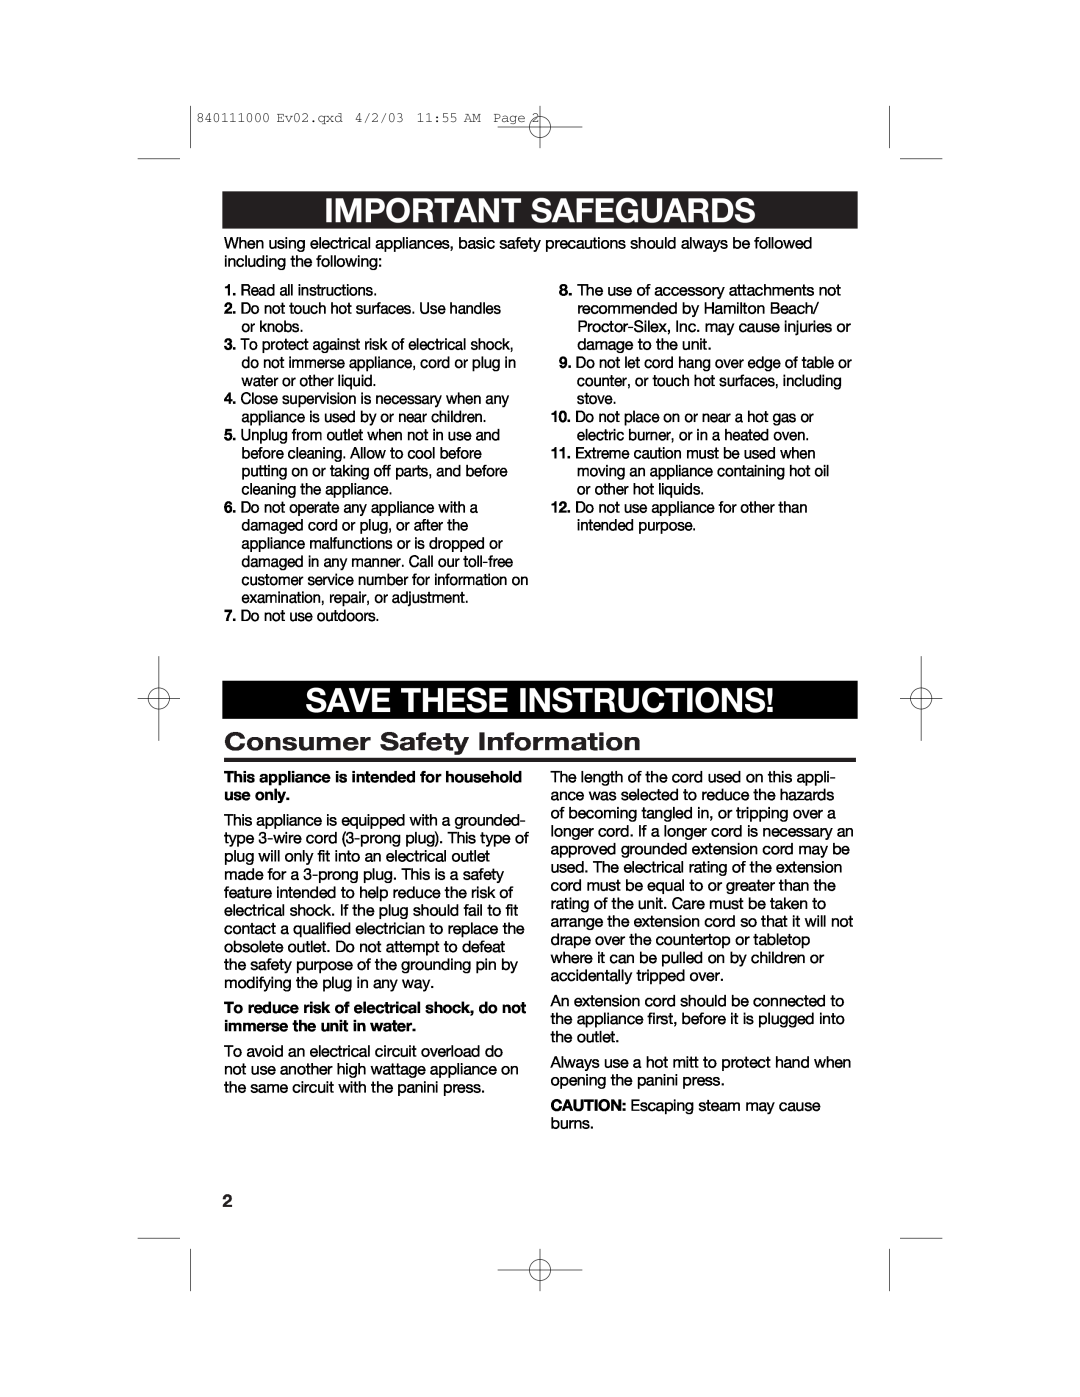 Hamilton Beach 25450 operating instructions Important Safeguards, Save These Instructions, Consumer Safety Information 